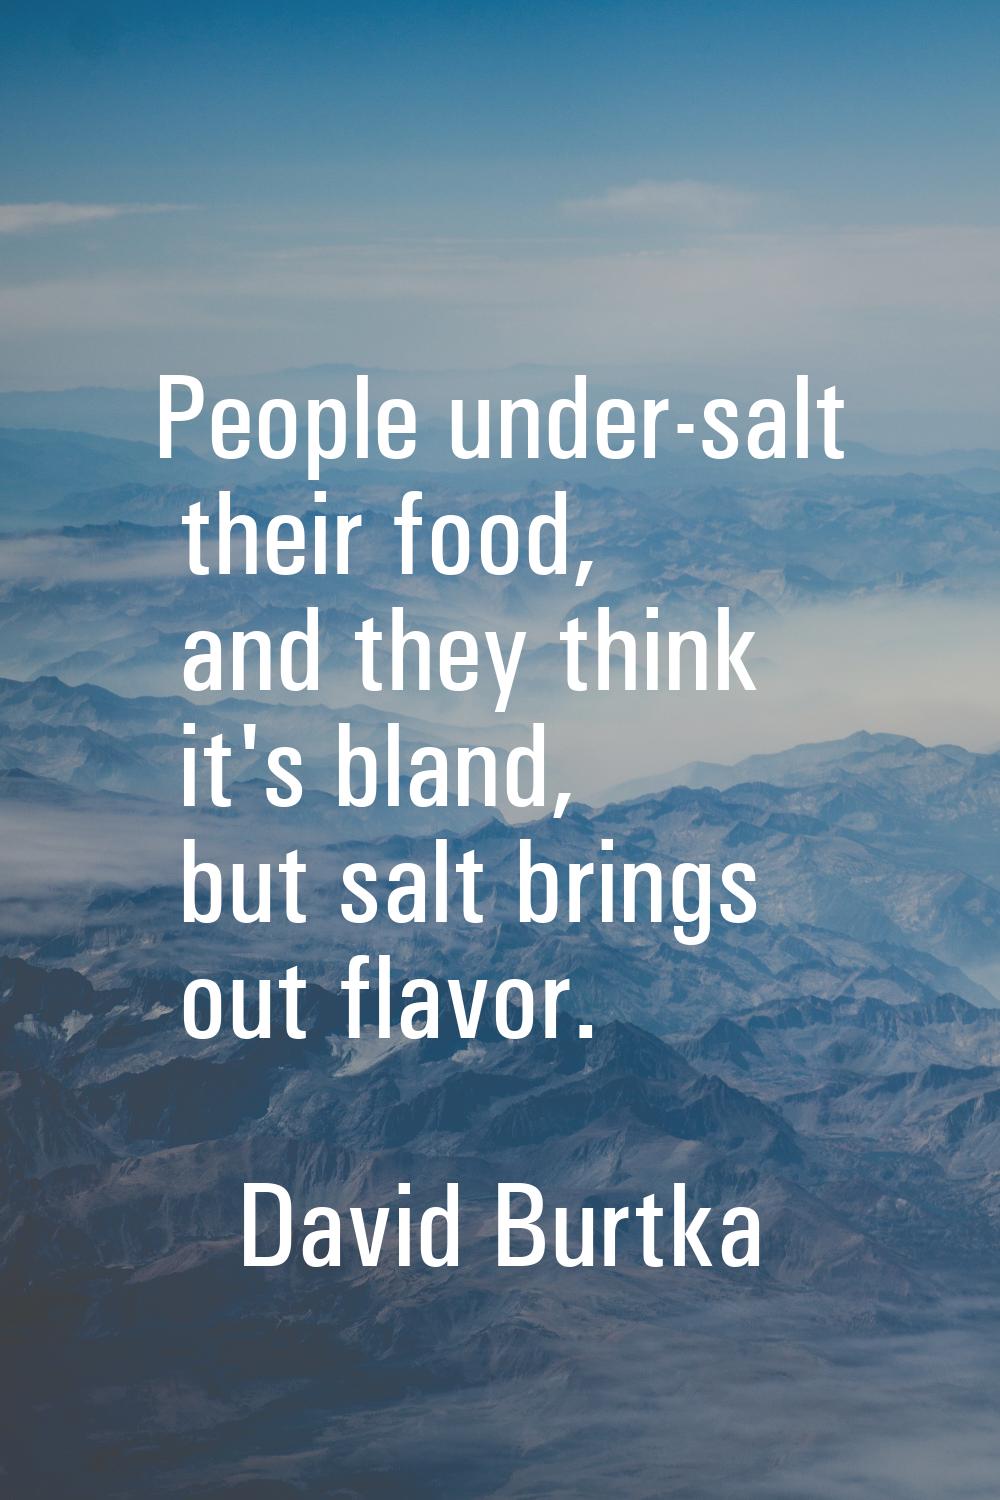 People under-salt their food, and they think it's bland, but salt brings out flavor.